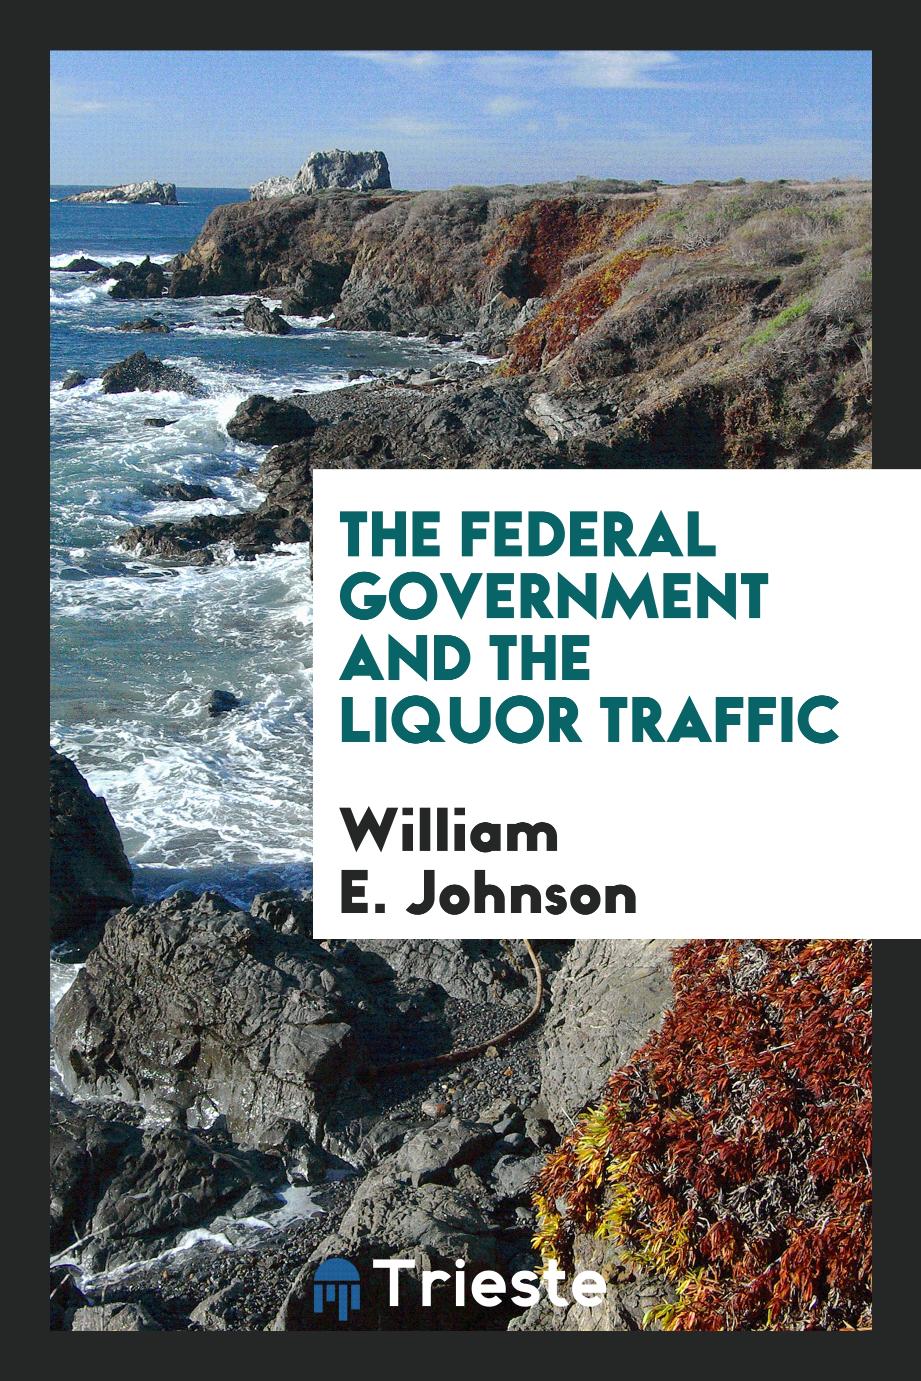 The federal government and the liquor traffic